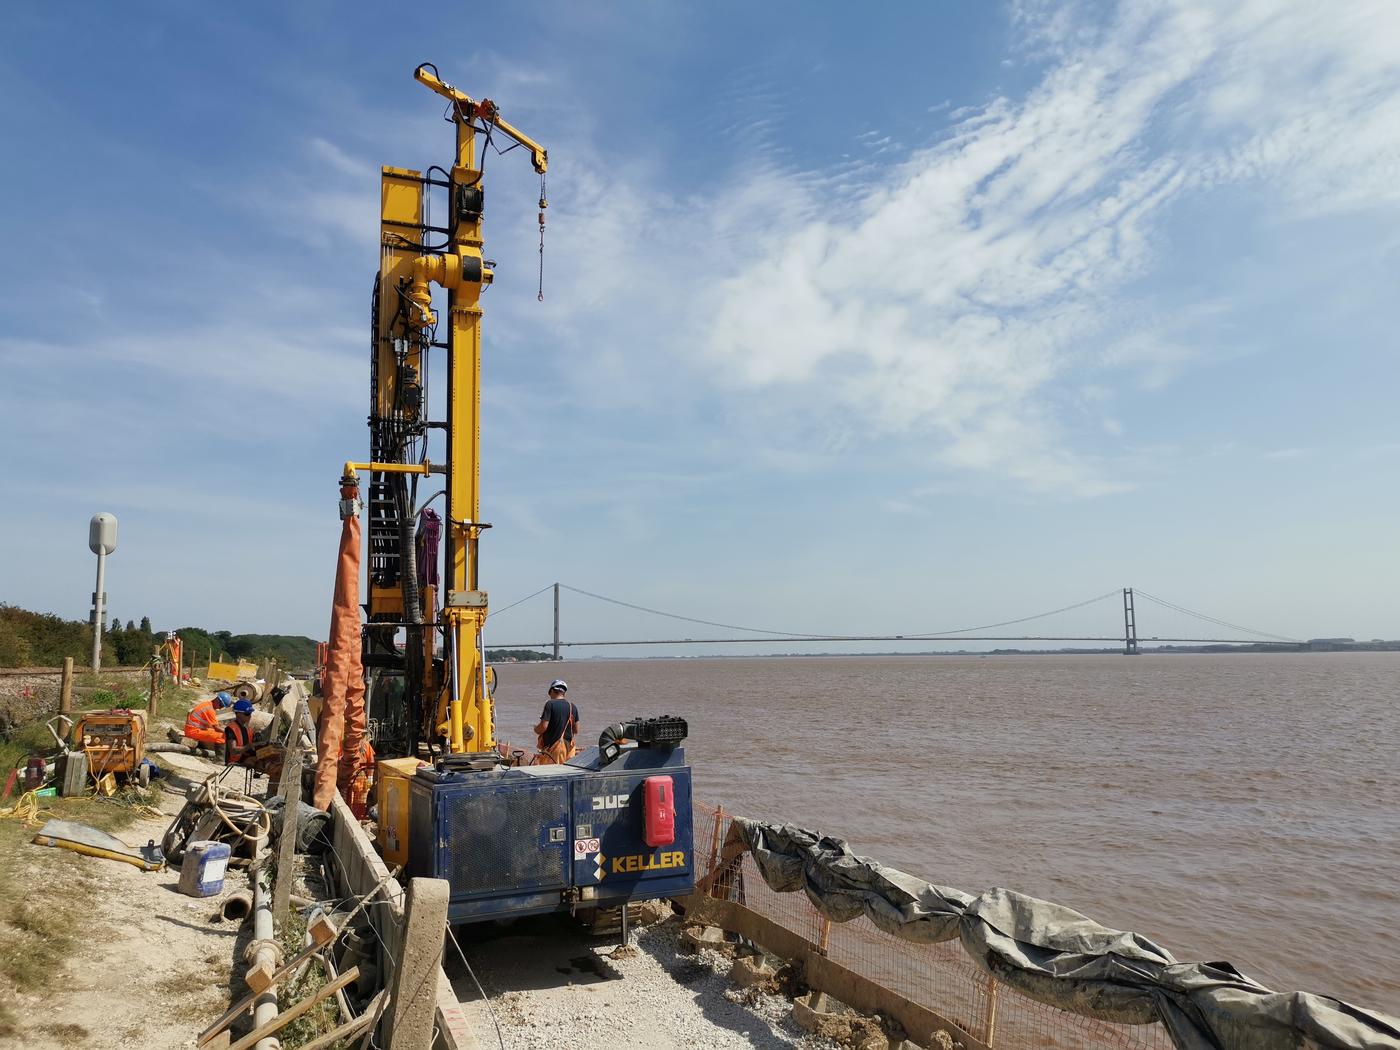 Installing sectional flight auger piles for a contiguous wall at Hessle